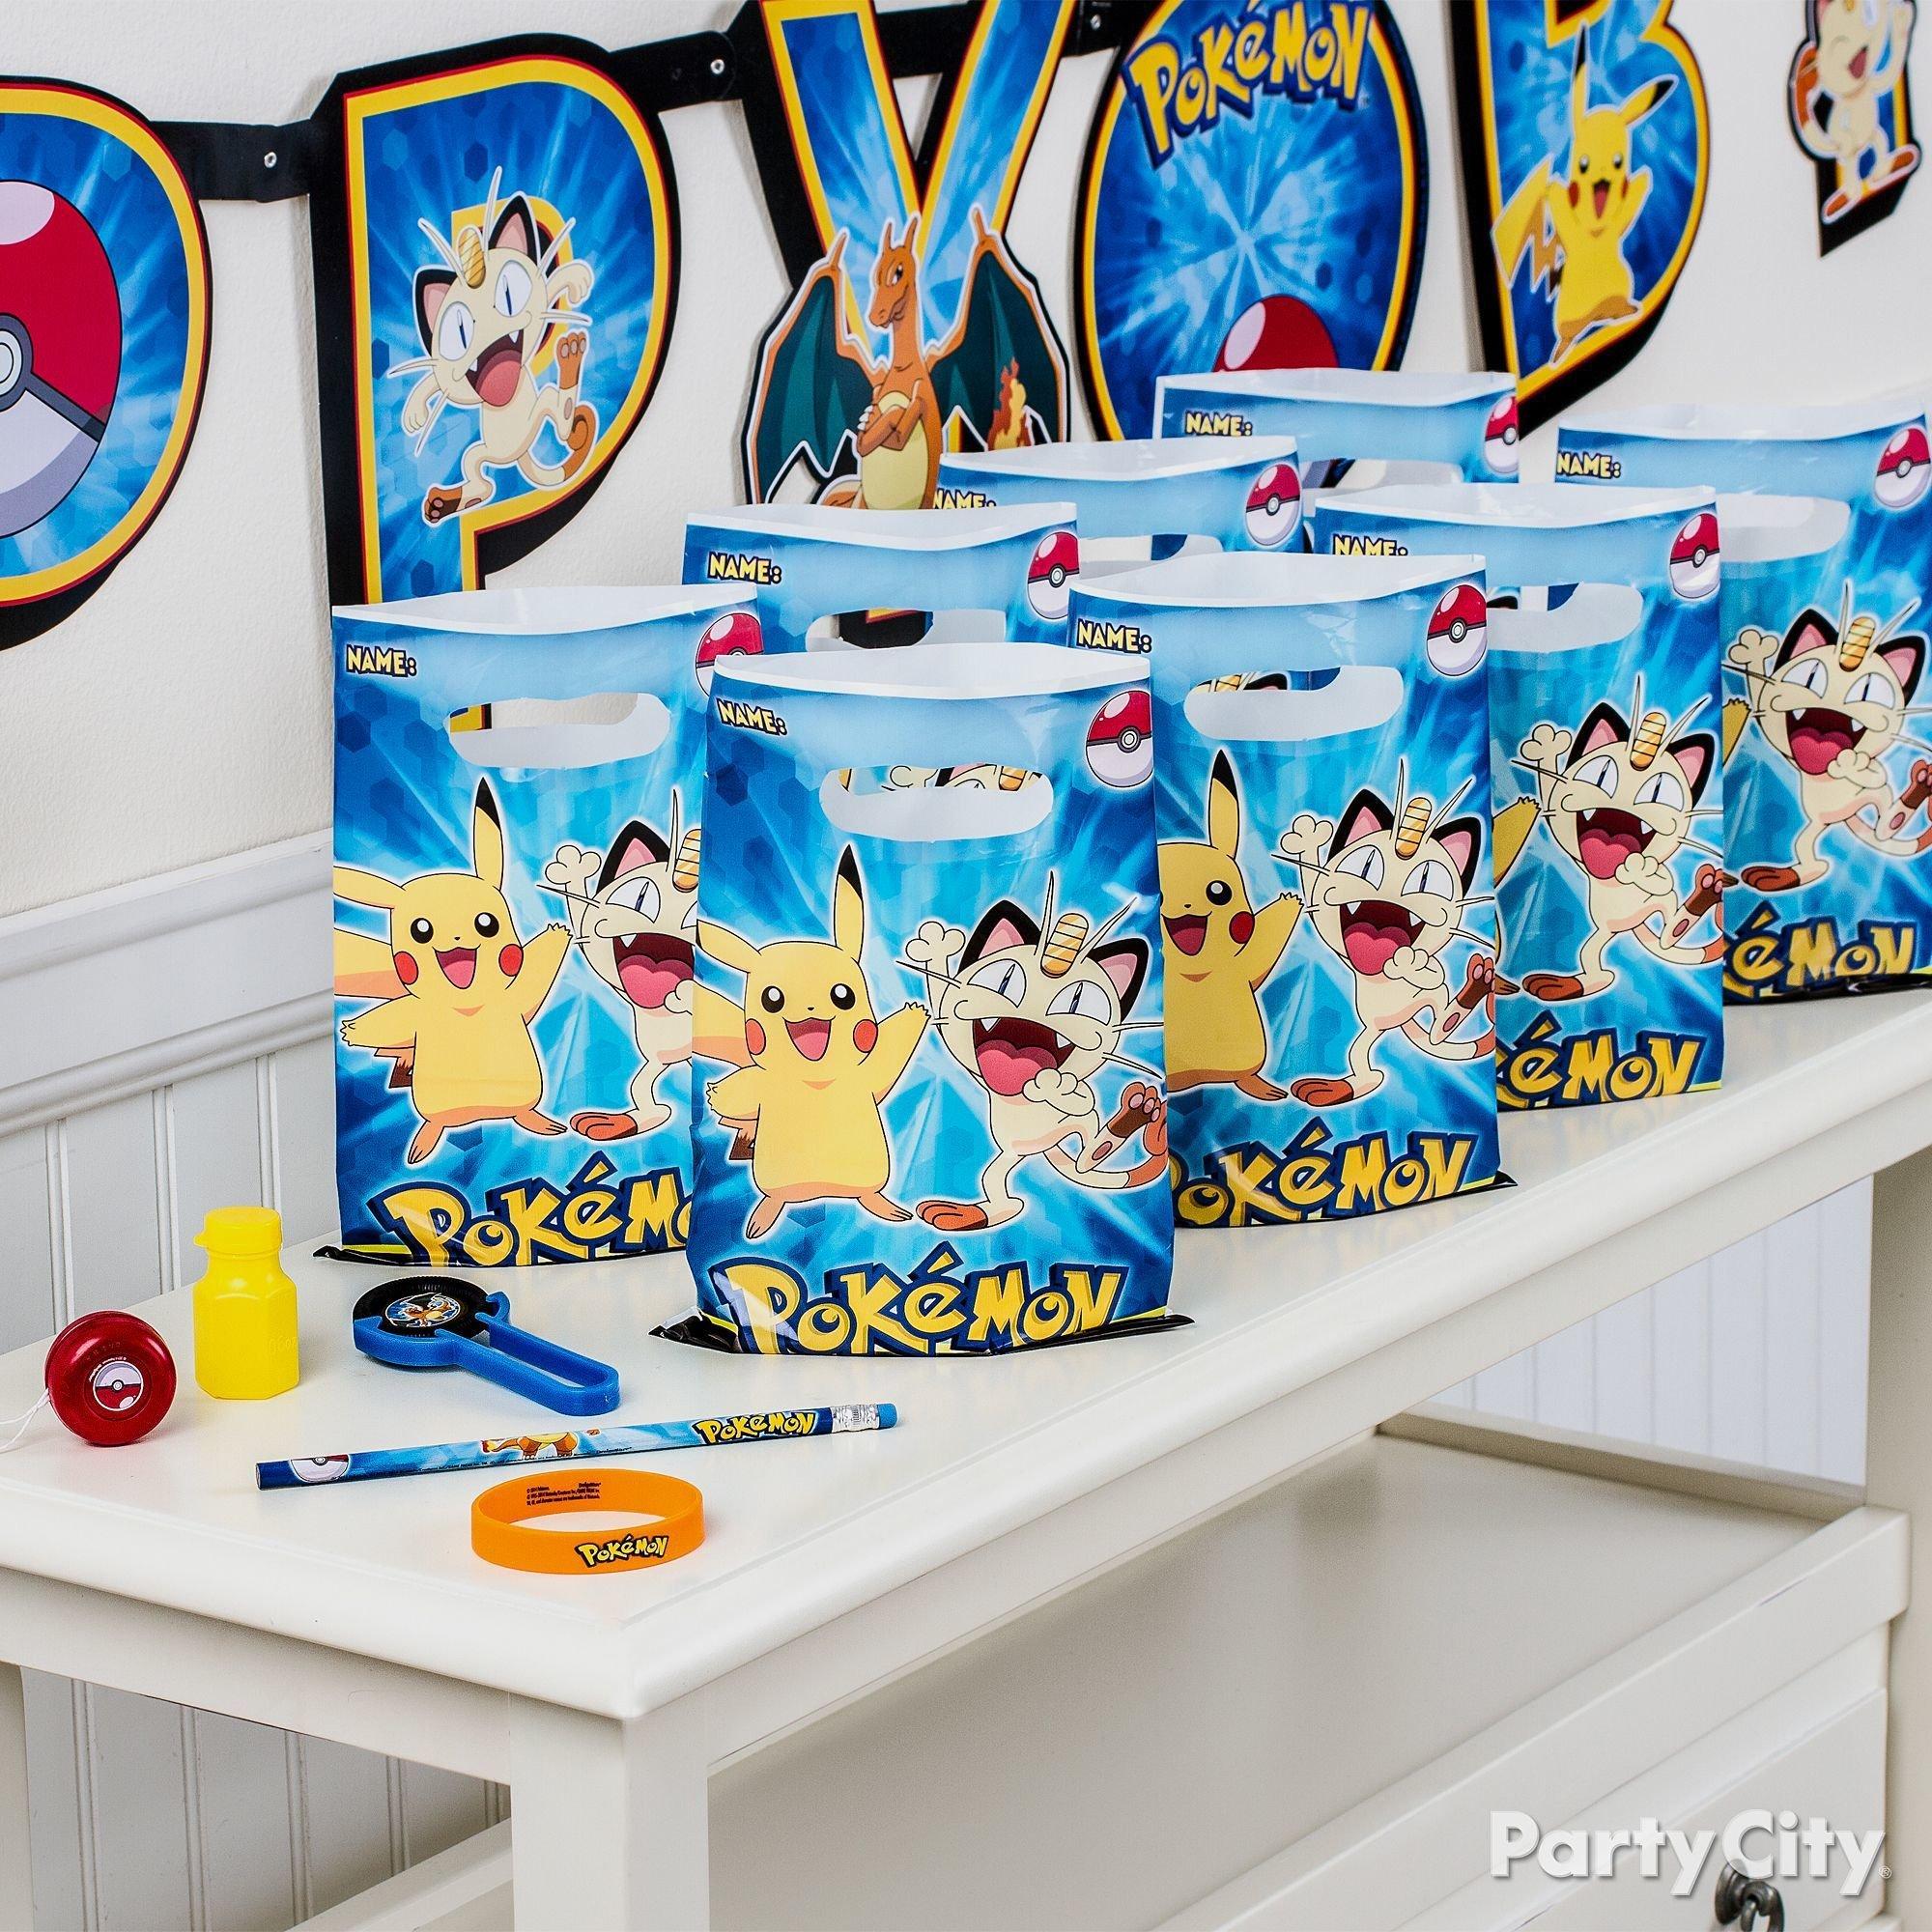  Mega Classic Pokemon Birthday Party Supplies Pack for 16 with  Pokemon Plates, Cups, Napkins, Table Cover, Birthday Candles, Add An Age  Banner, Swirls, Balloons, Blue Garland and Pin : Toys 